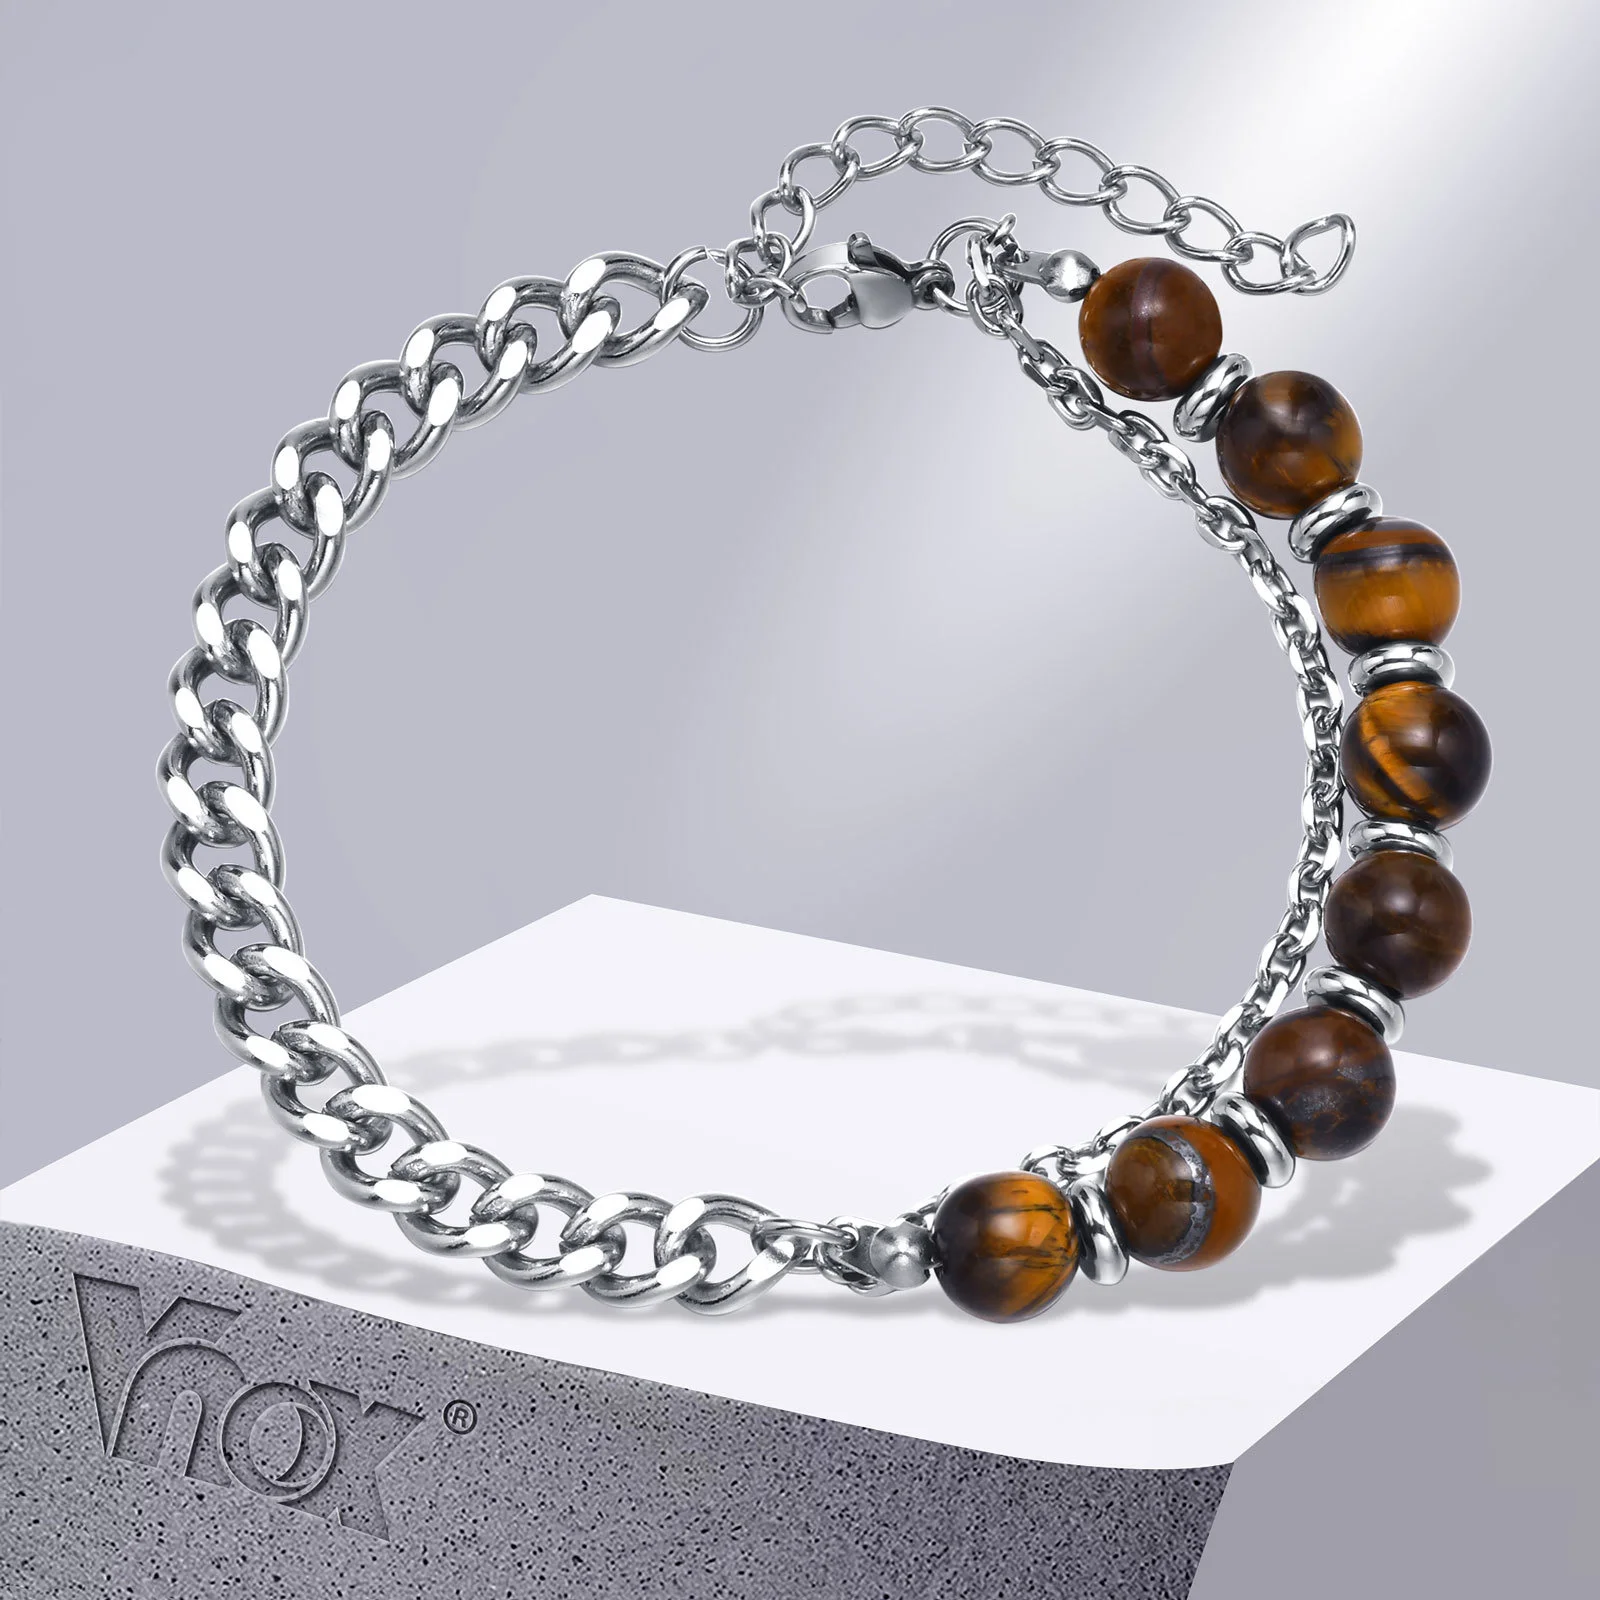 

Vnox Cuban Chain Bracelets for Men, Tiger Eye Map Stone Beads Bracelets, Never Fade Stainless Steel Curb Anchor Links Wristband